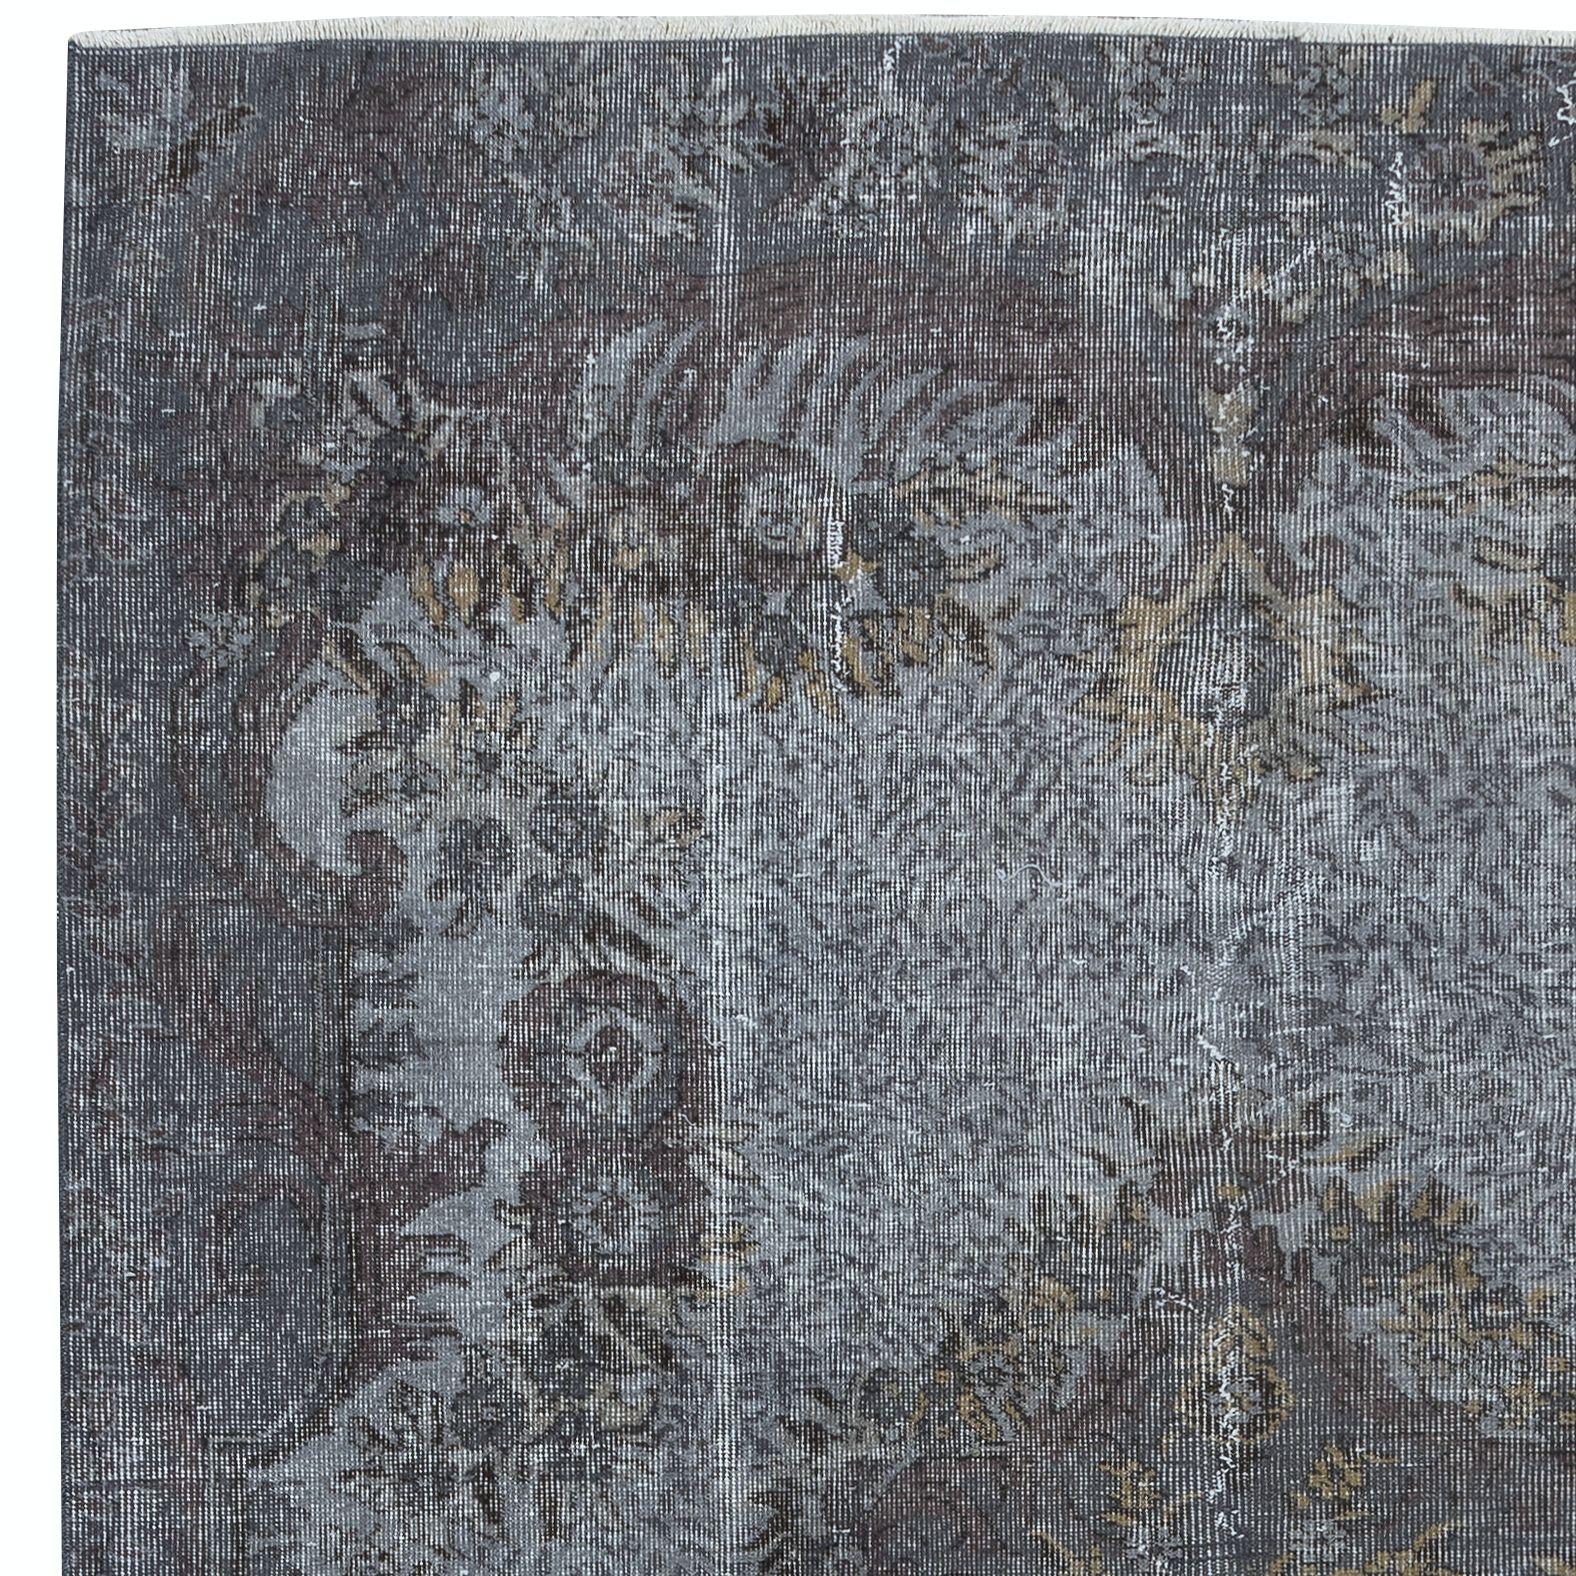 Hand-Woven 6.5x9.6 Ft Aubusson Inspired Rug in Gray for Modern Interior, Handmade in Turkey For Sale